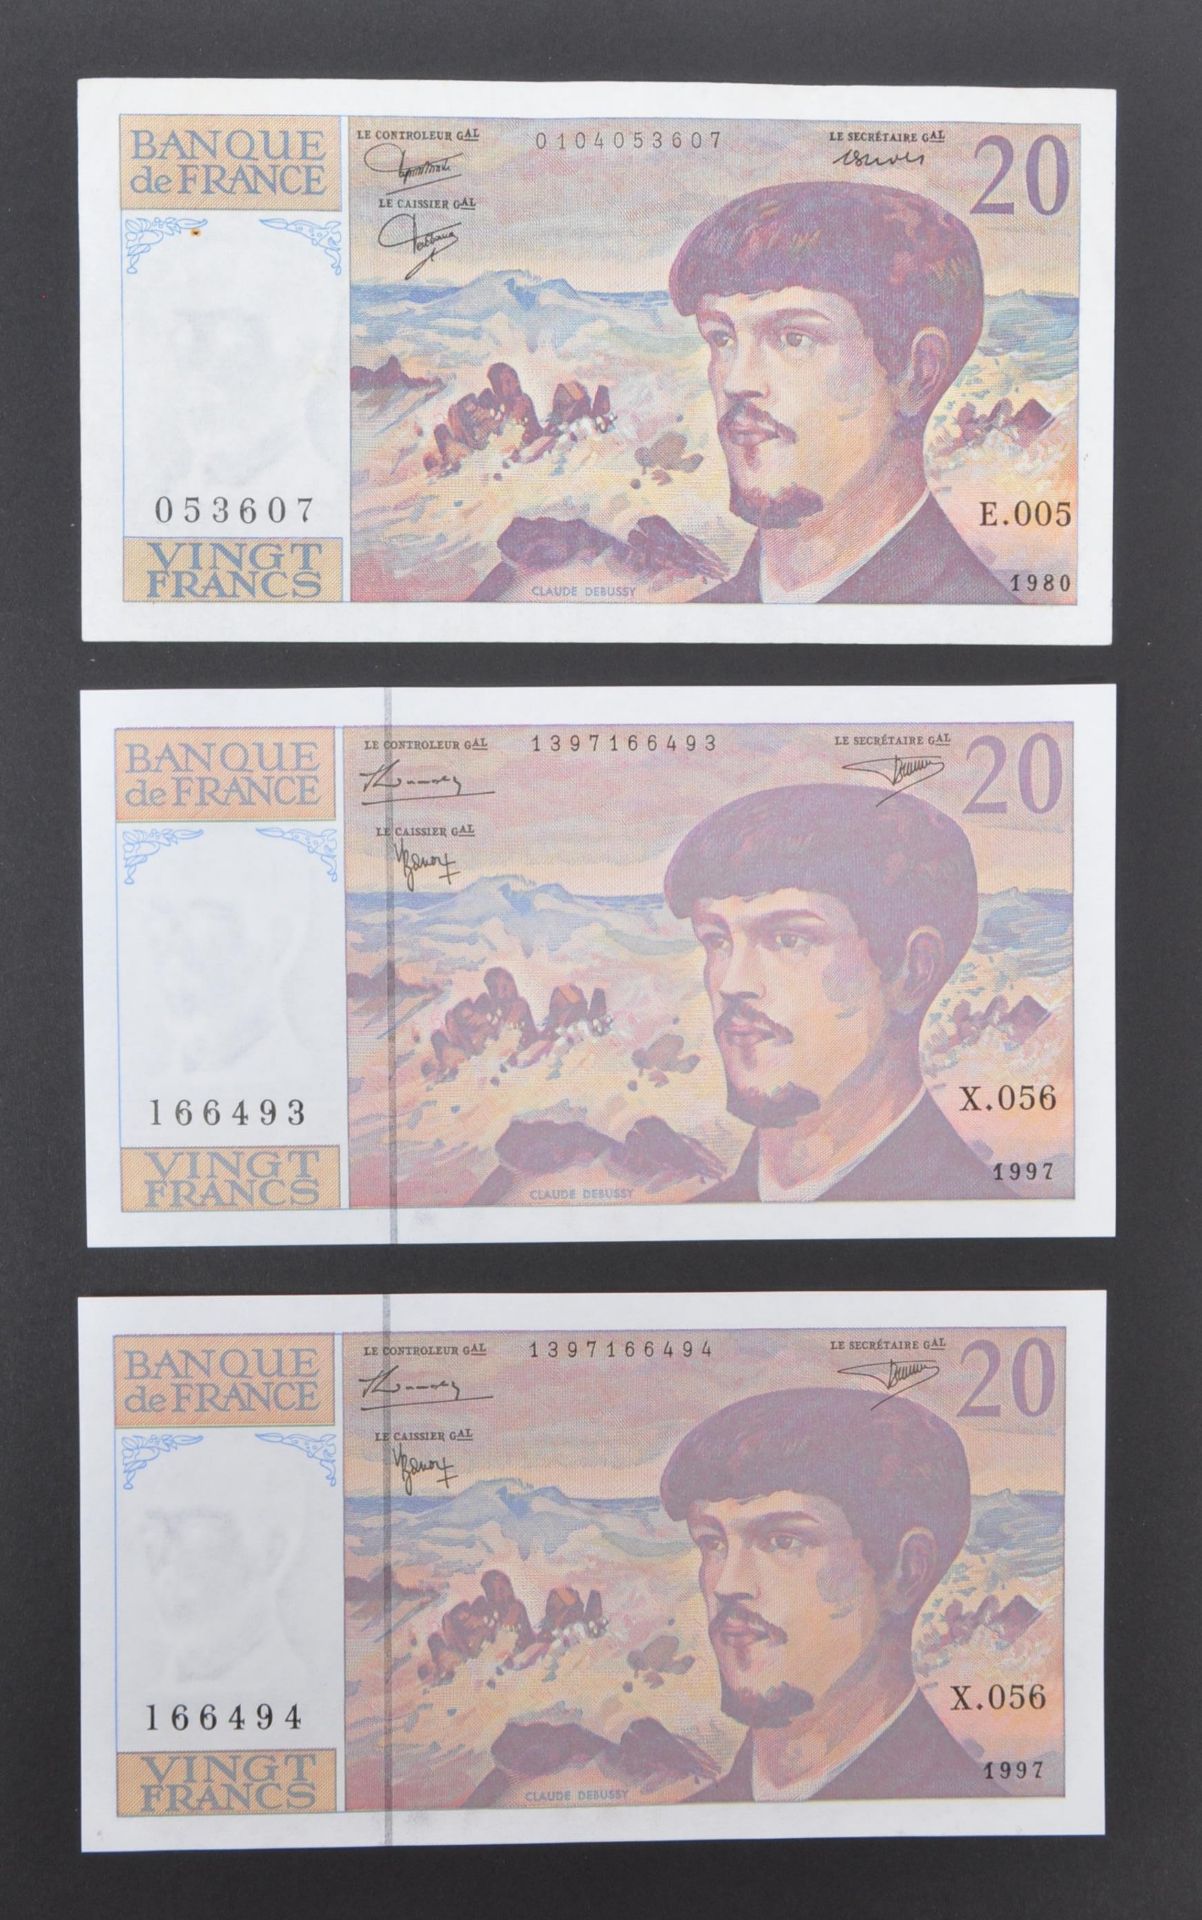 INTERNATIONAL MOSTLY UNCIRCULATED BANK NOTES - EUROPE - Image 7 of 30